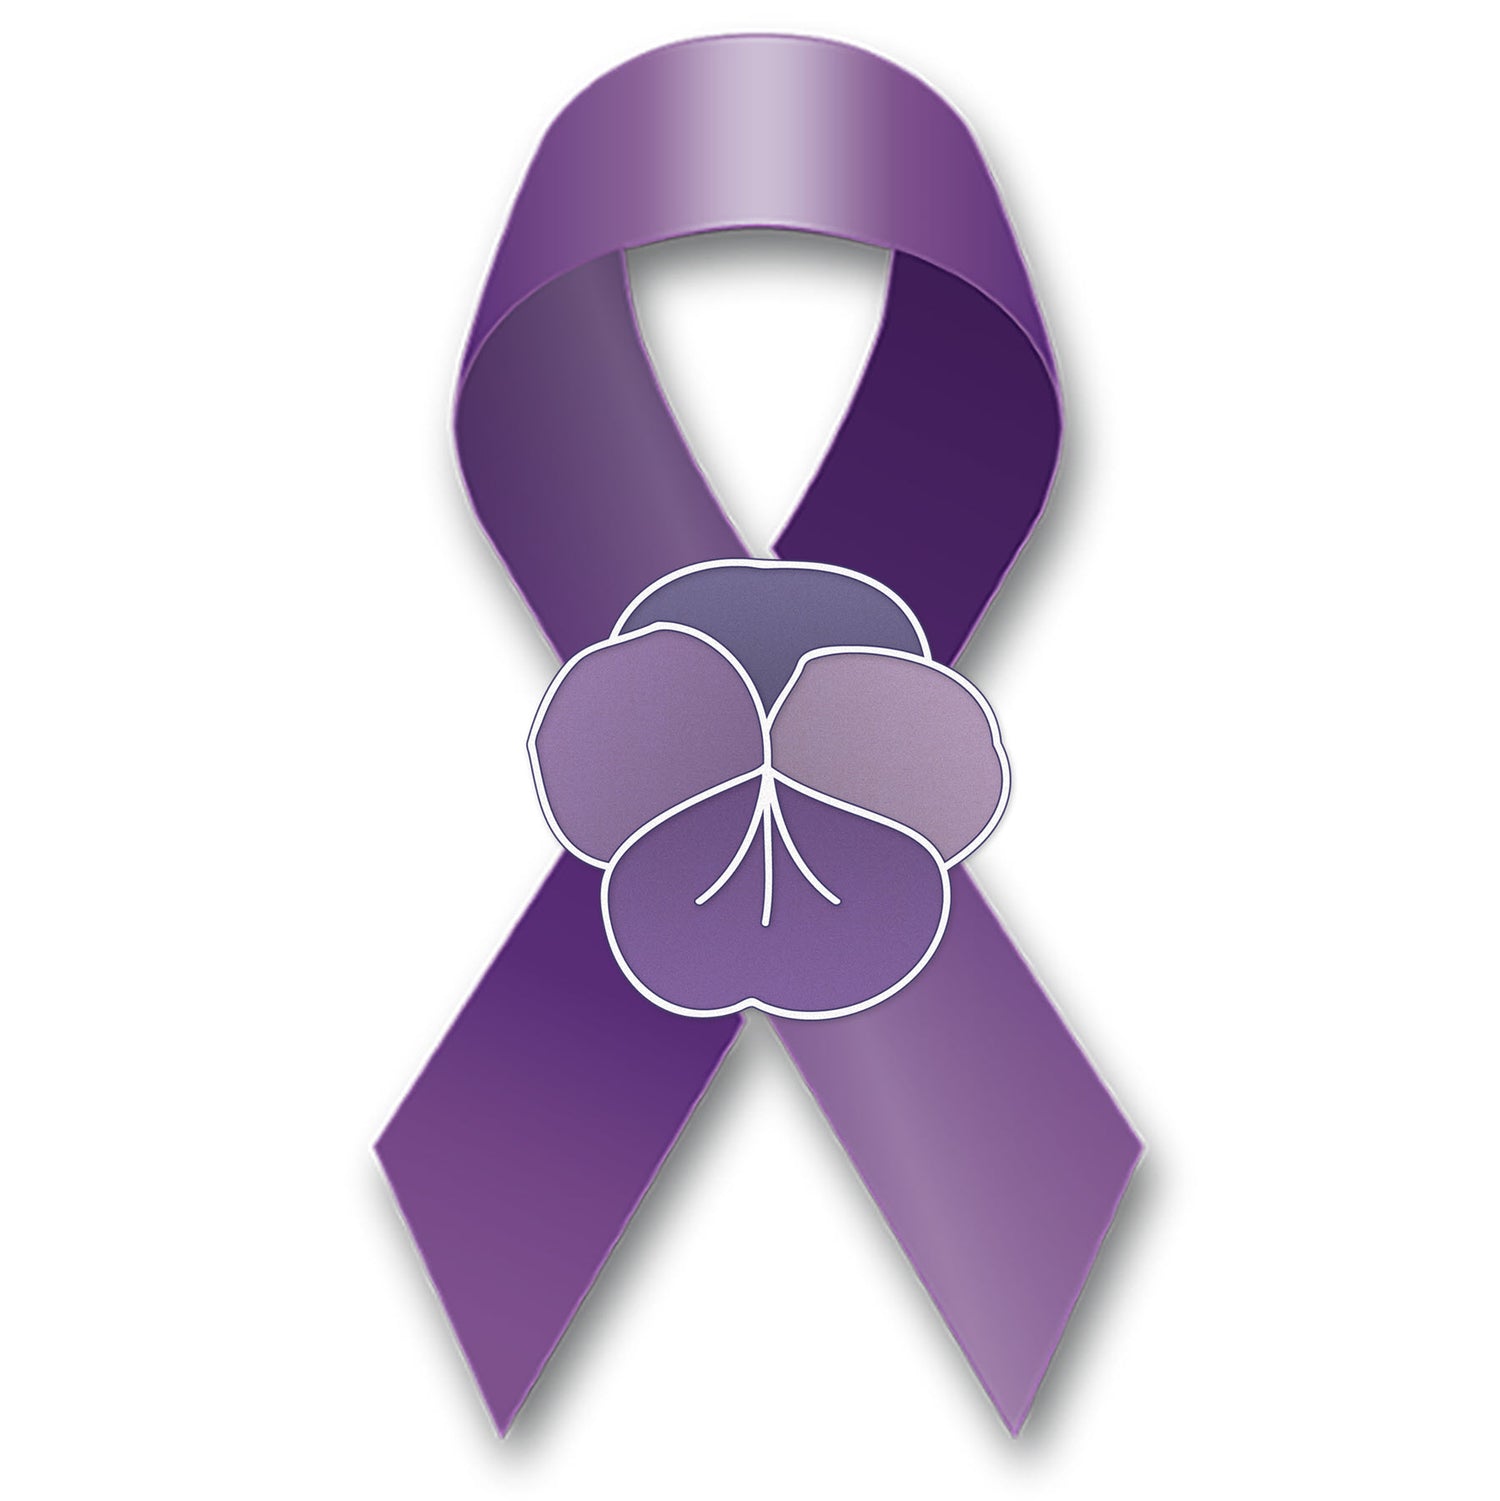 Pancreatic Cancer Fundraising